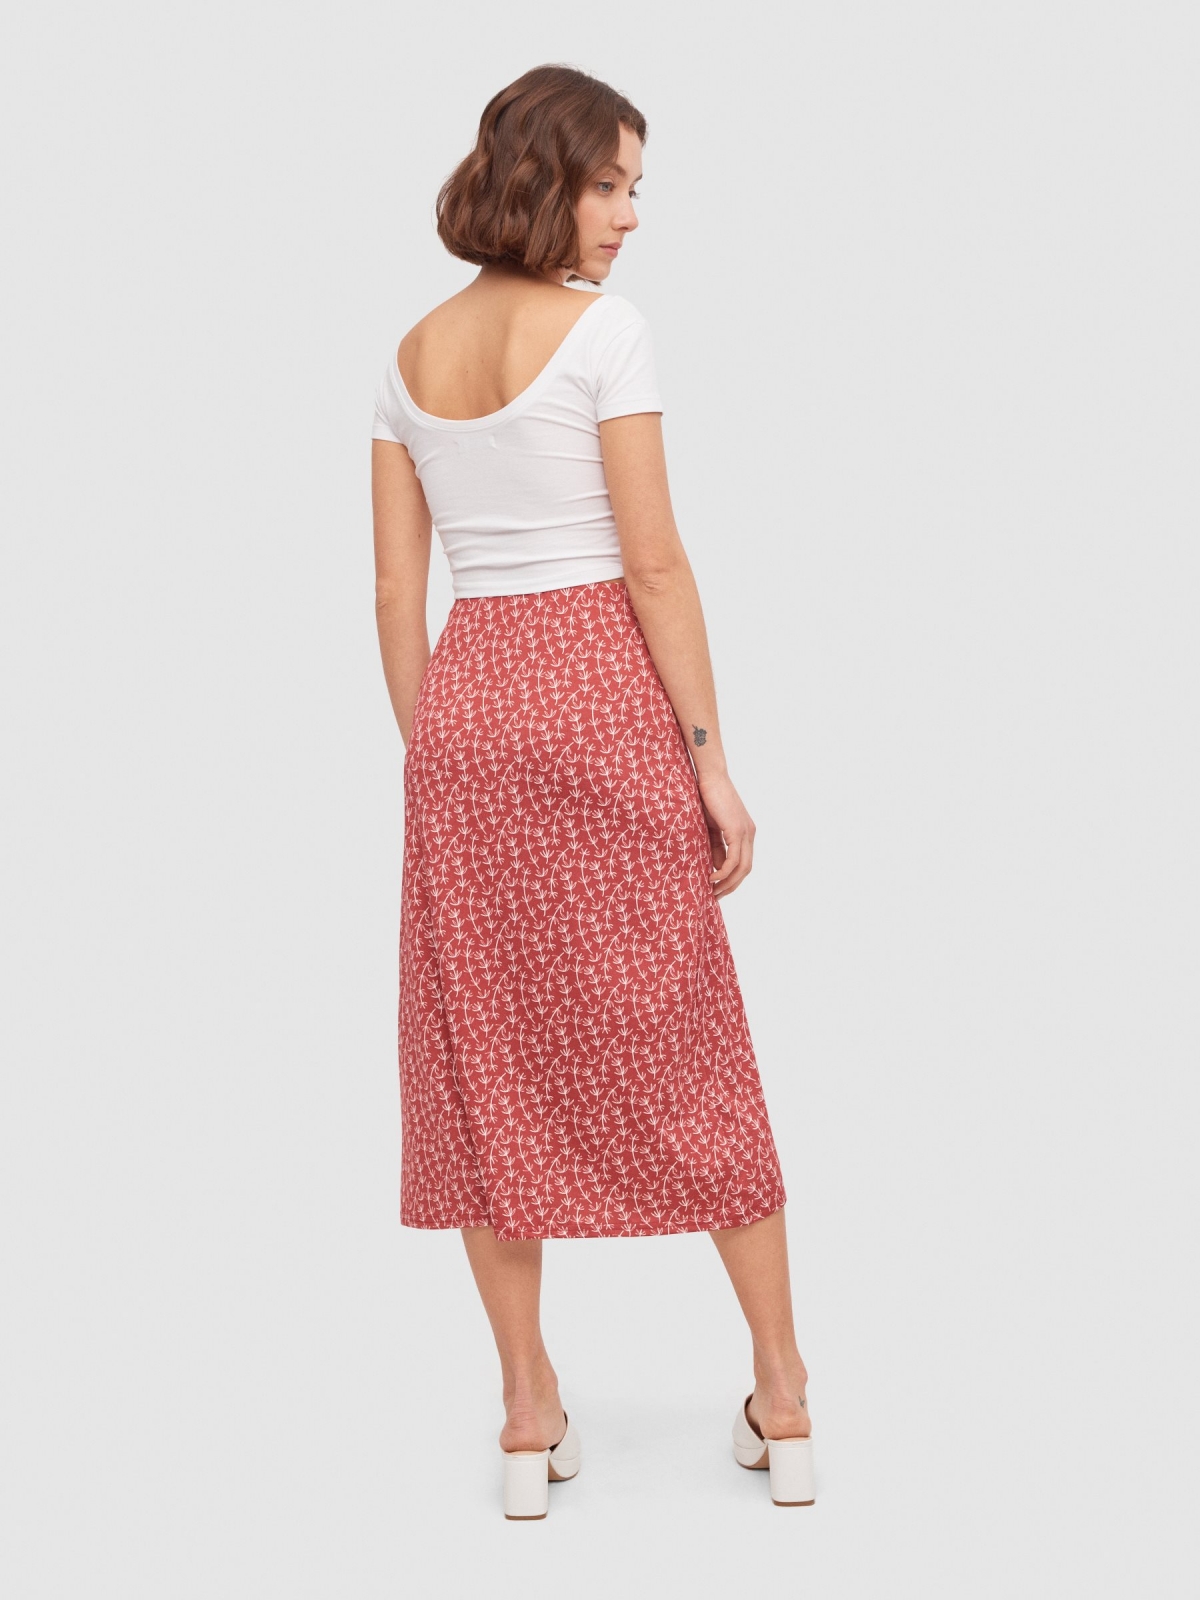 Floral midi skirt red middle back view